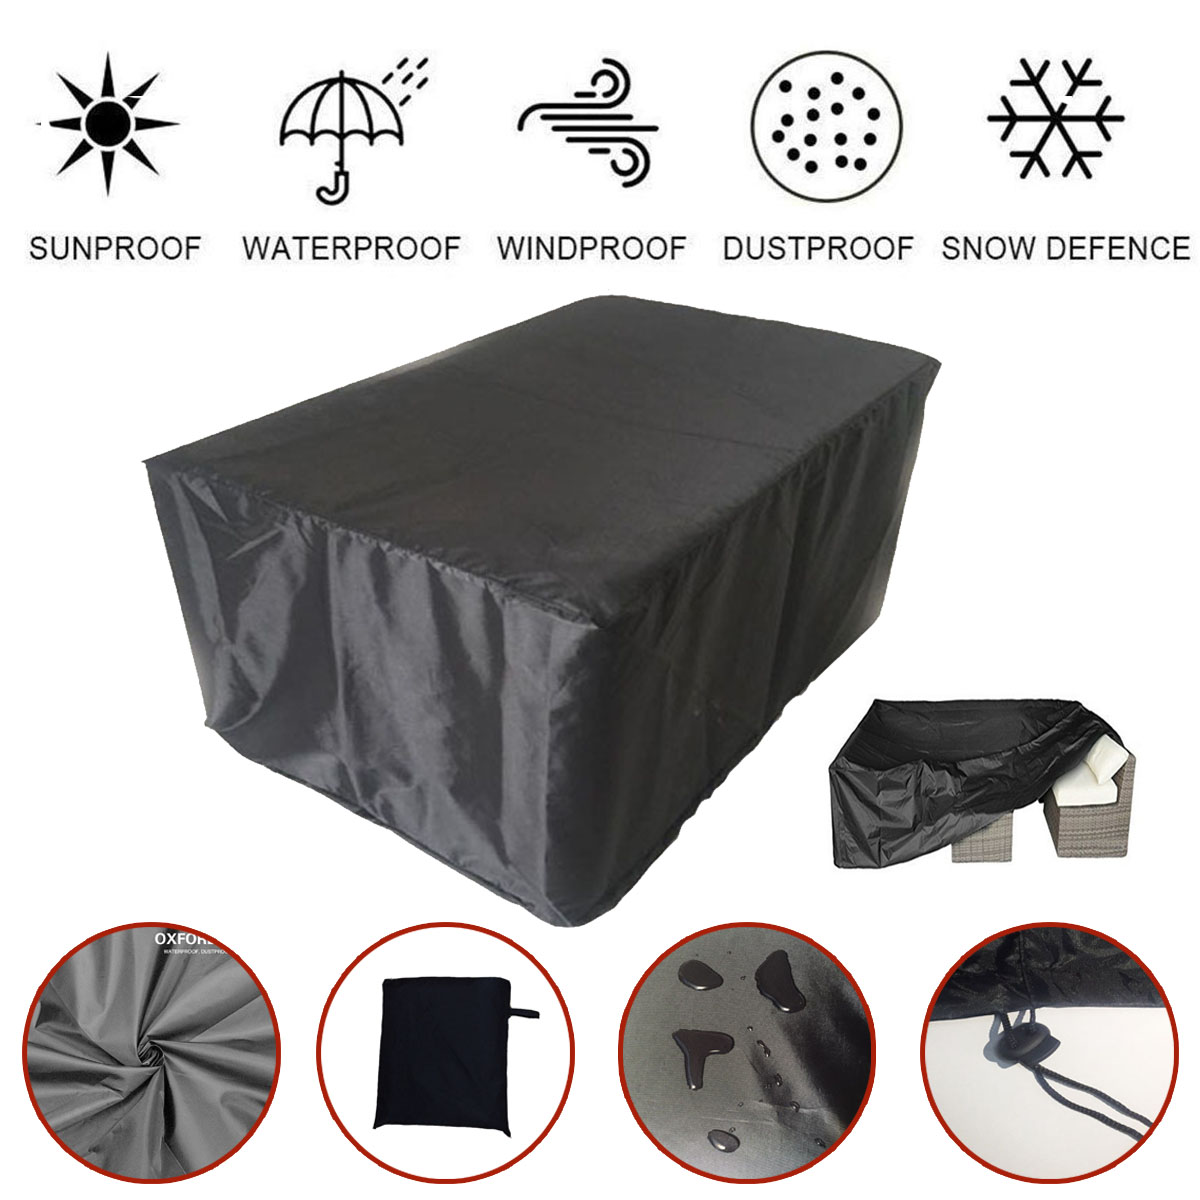 Black/Gray Waterproof Oxford Cloth Furniture Cover Outdoor Dustproof Protect Cover Patio Garden Rain Snow Grill Sofa Table Cover